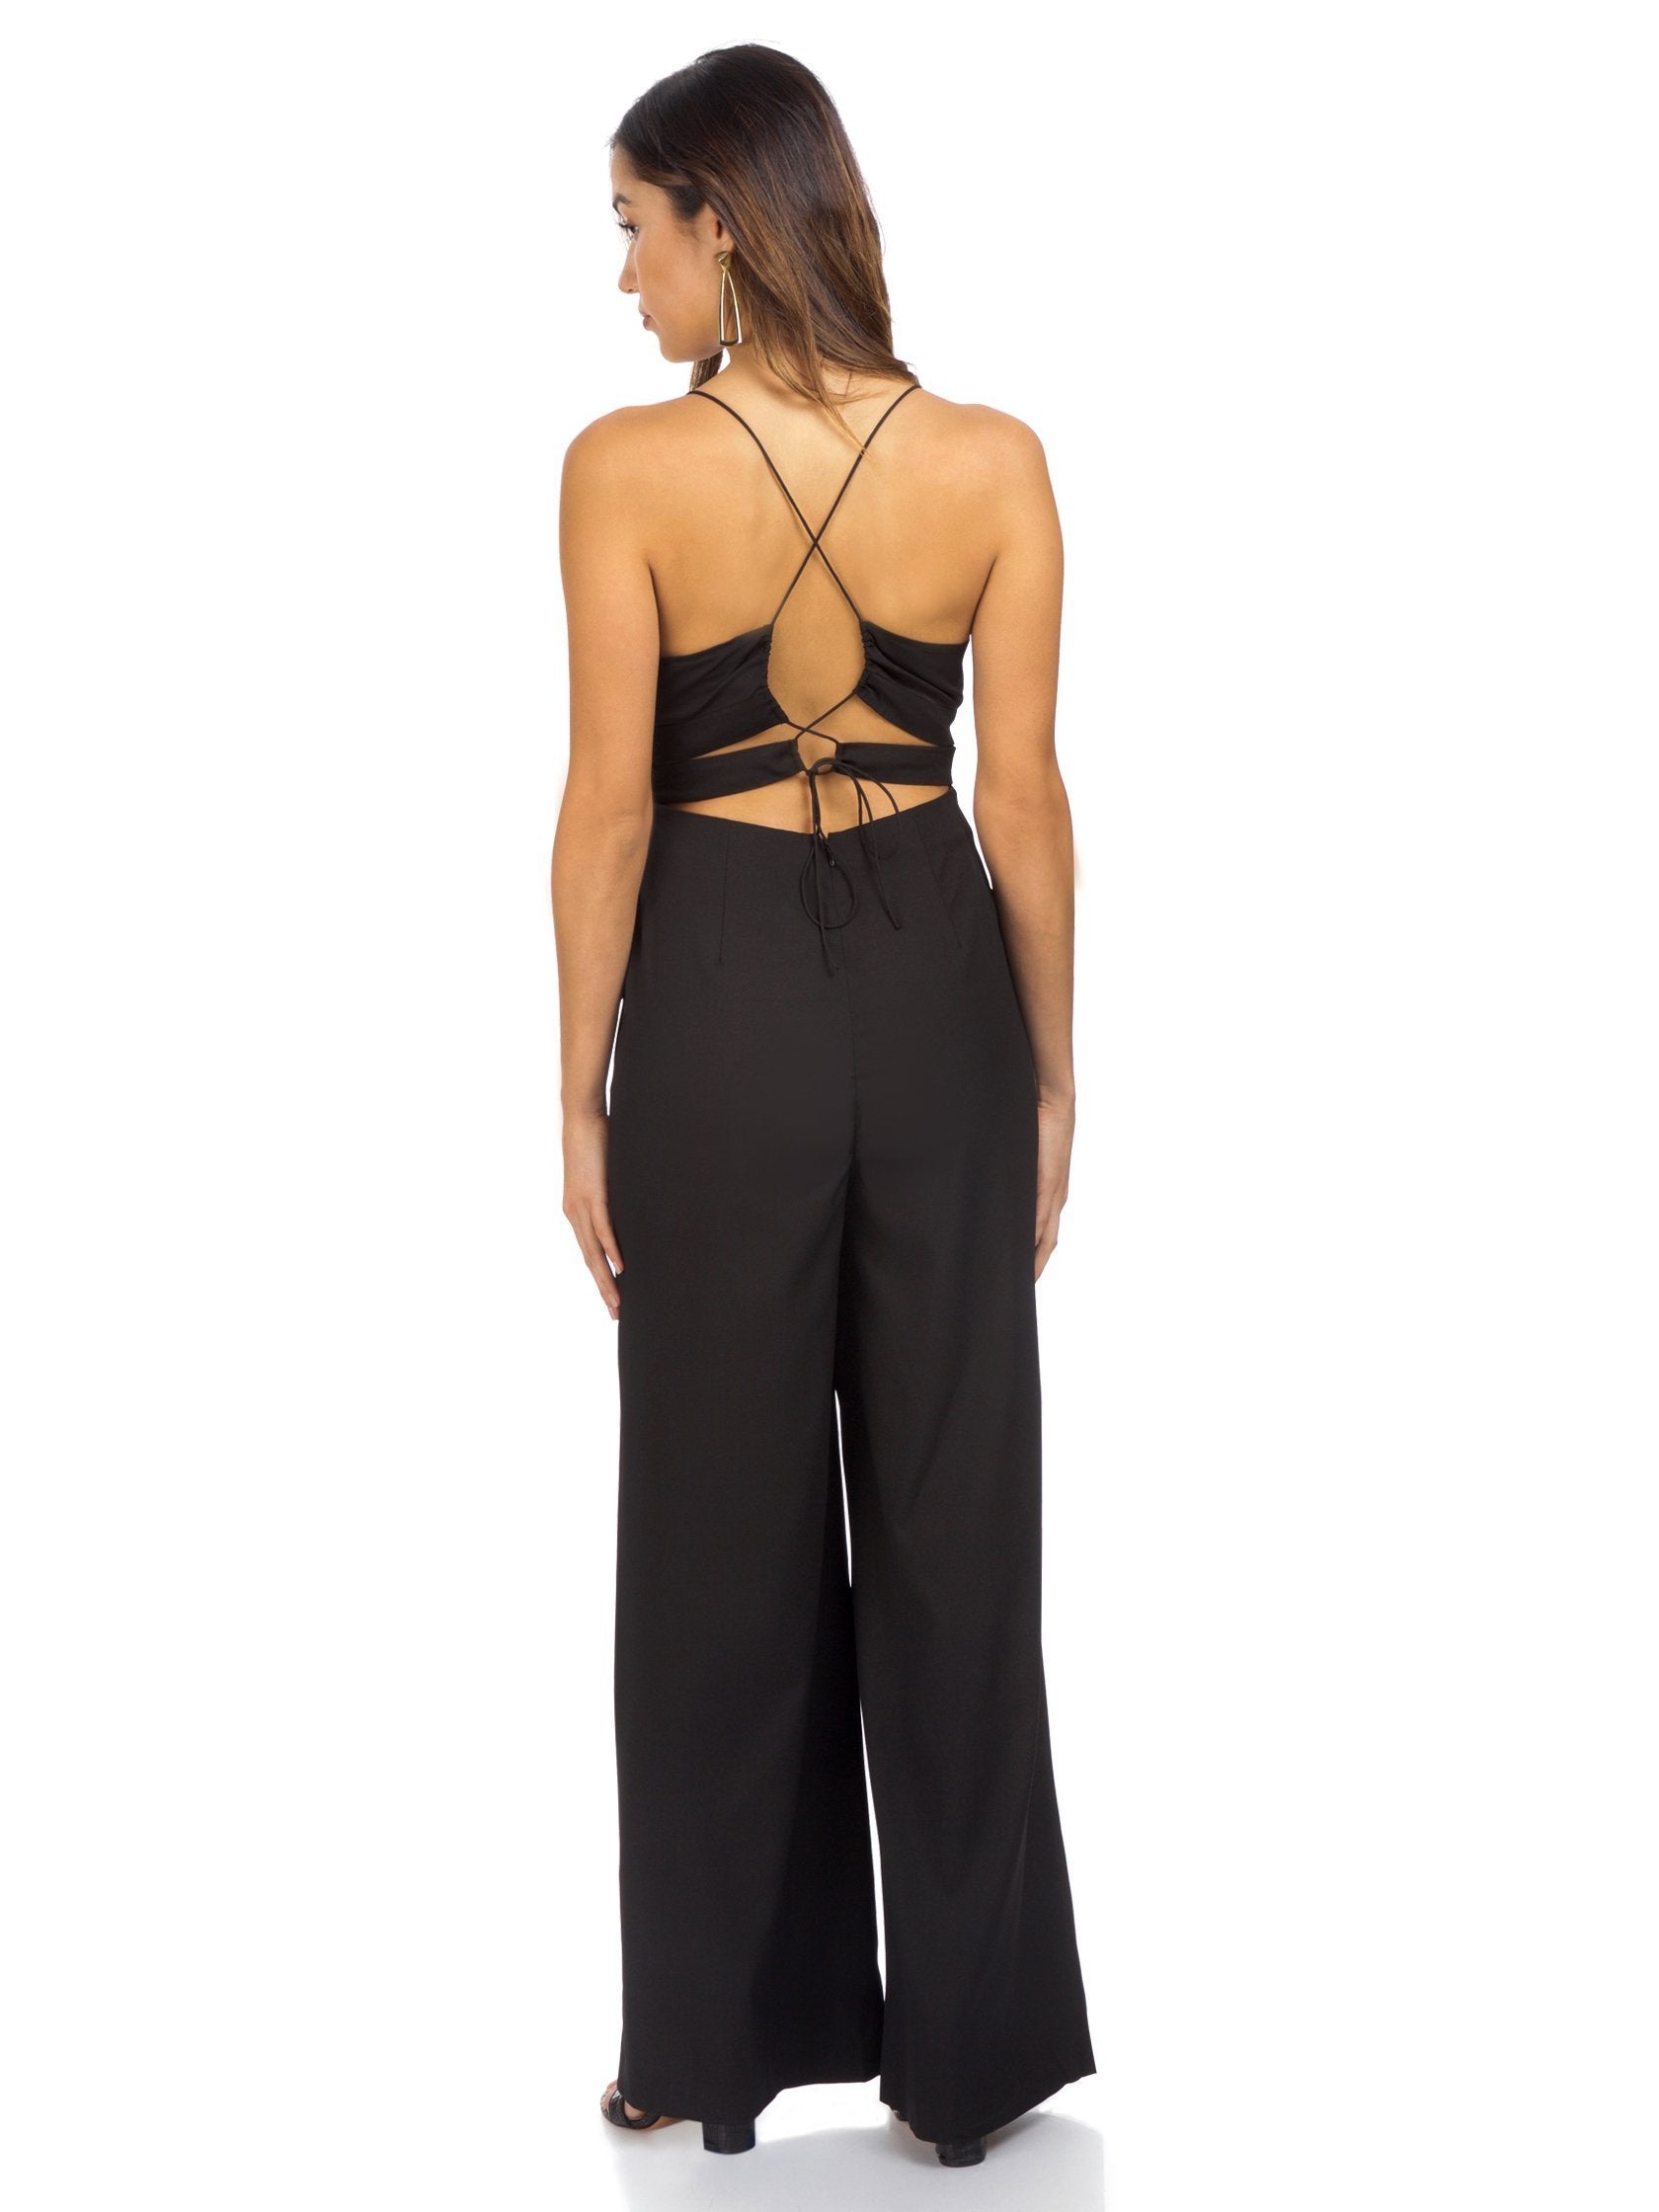 Women wearing a jumpsuit rental from YUMI KIM called Light My Fire Jumpsuit